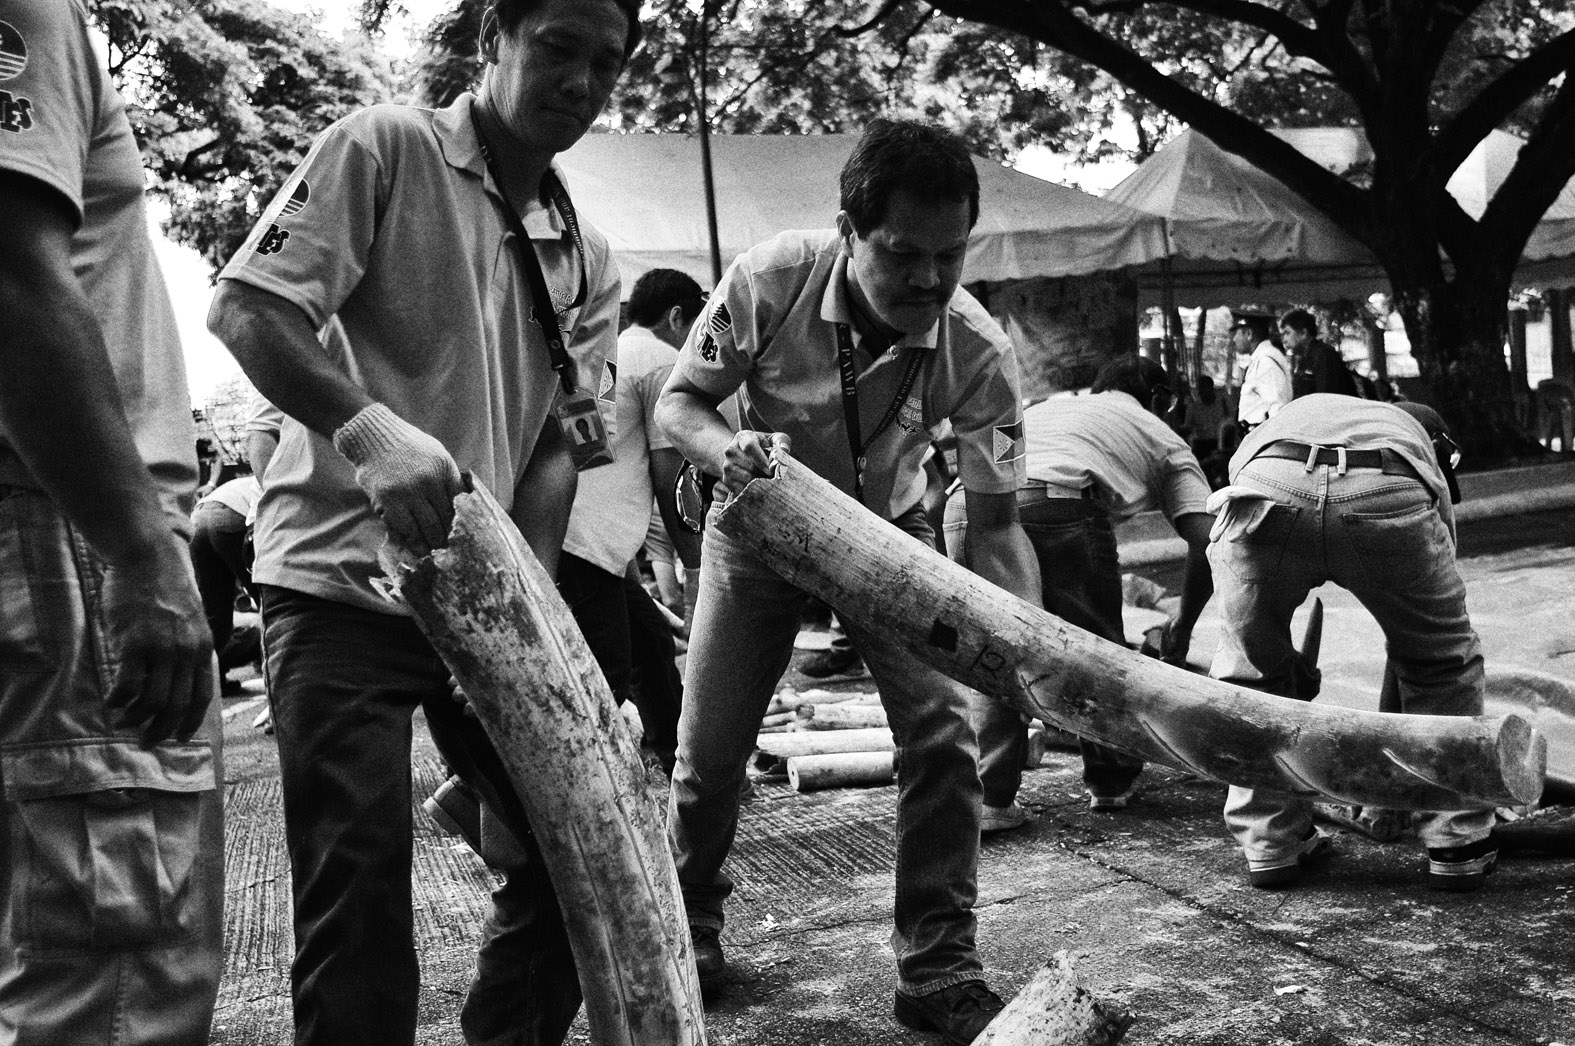 Illegal ivory in the Philippines